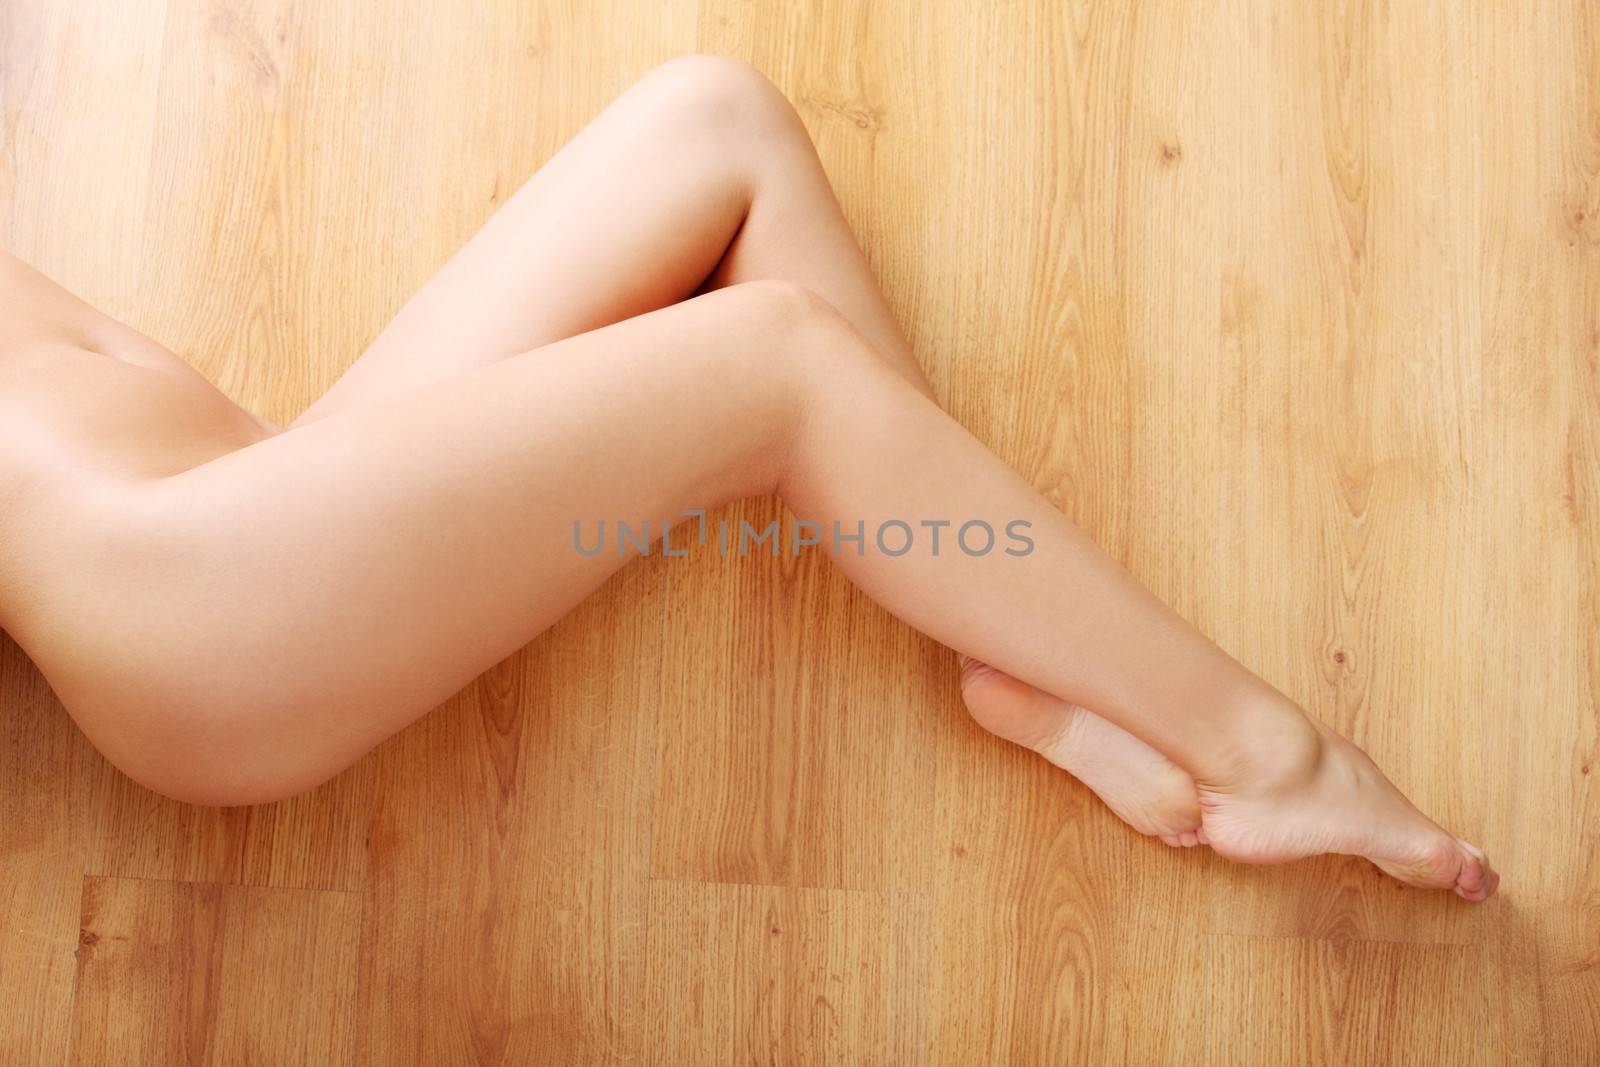 Sexy nude woman body (legs) on wooden flor